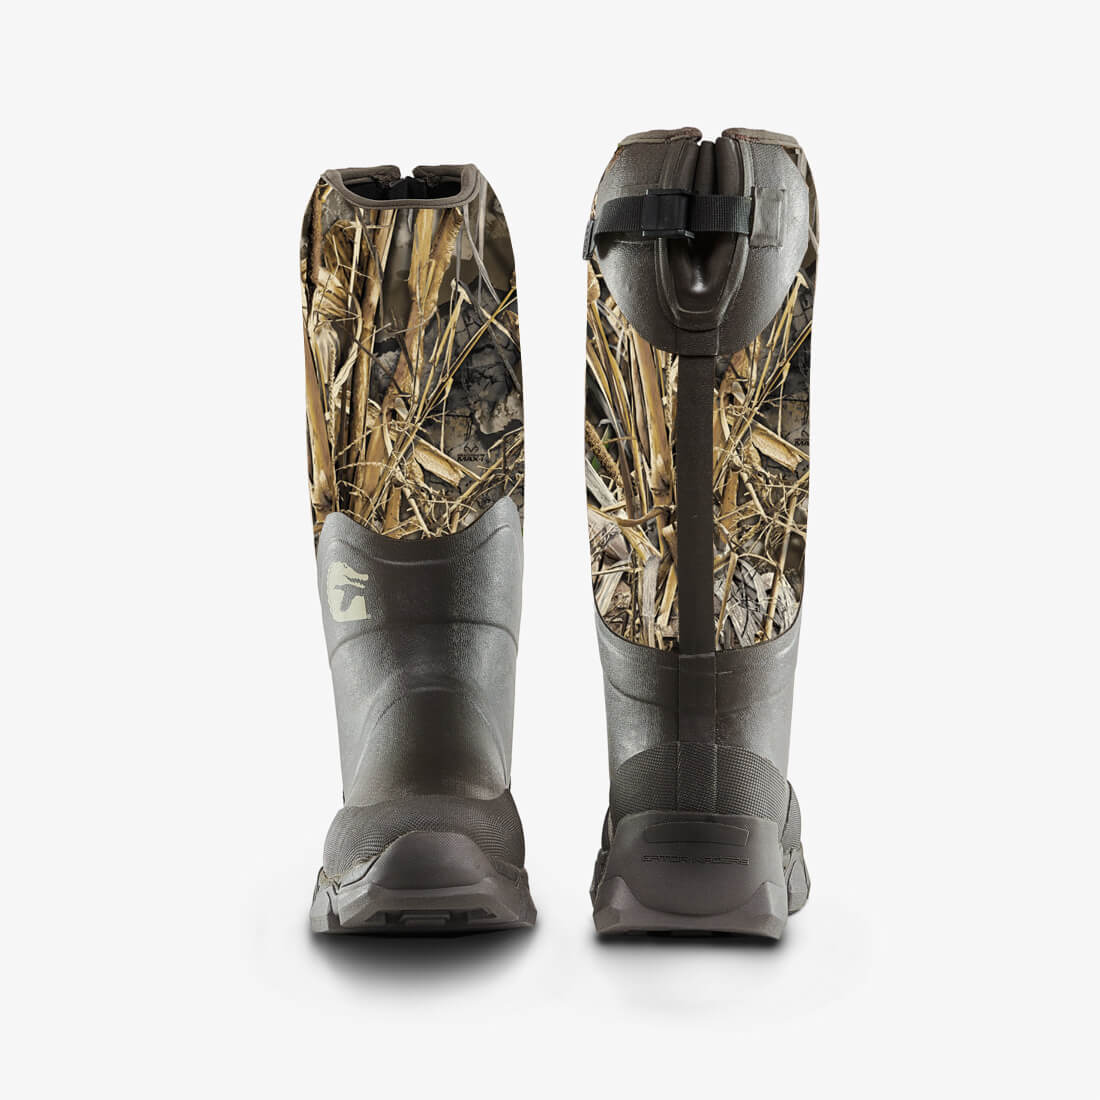 GATOR WADERS REALTREE MAX 7 CAMP BOOT - Pee Dee Outfitters